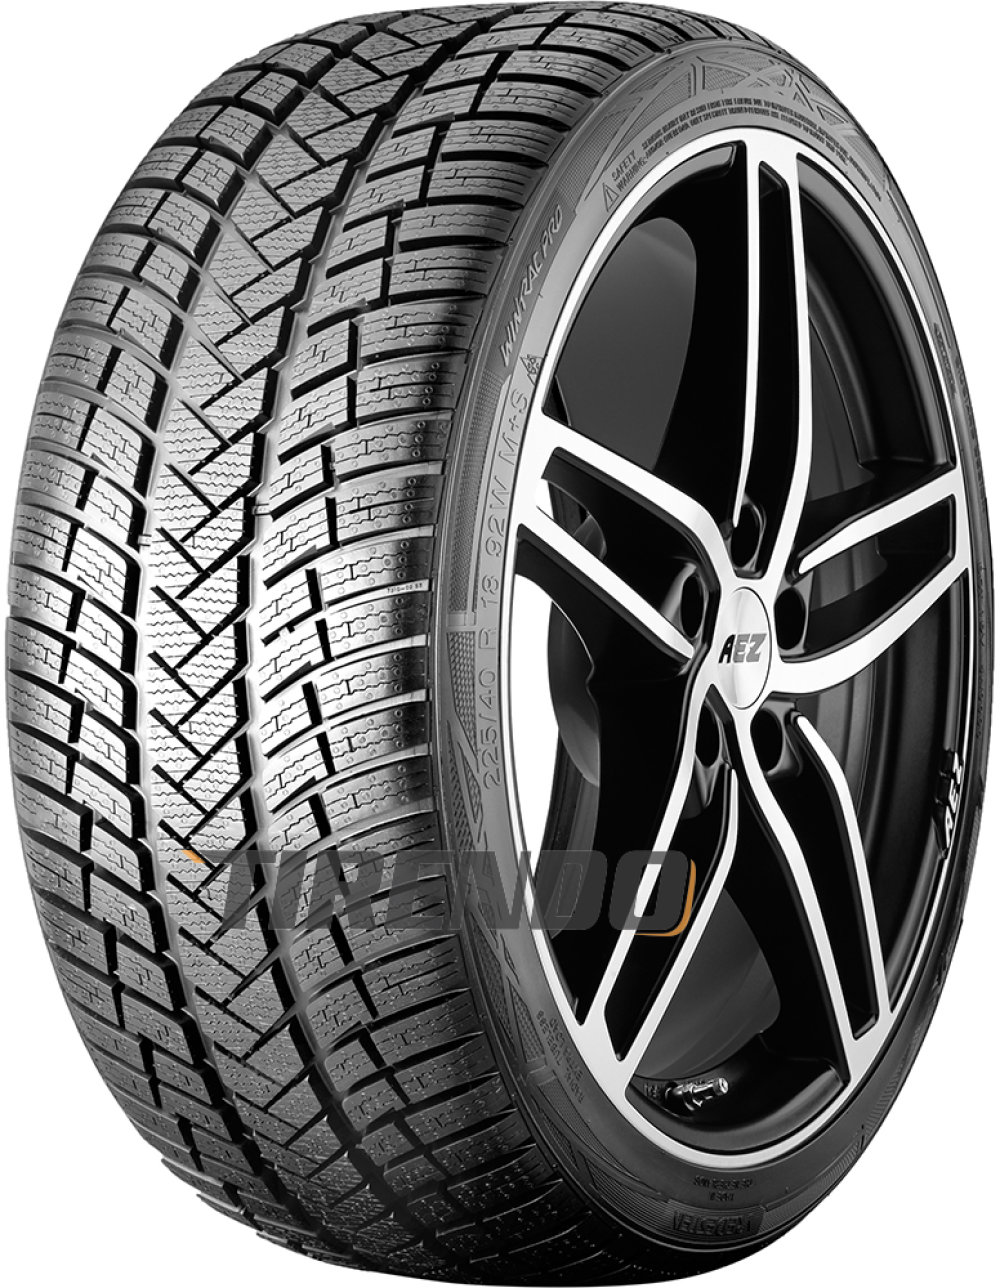 Image of Vredestein Wintrac Pro ( 245/50 R20 105V XL )